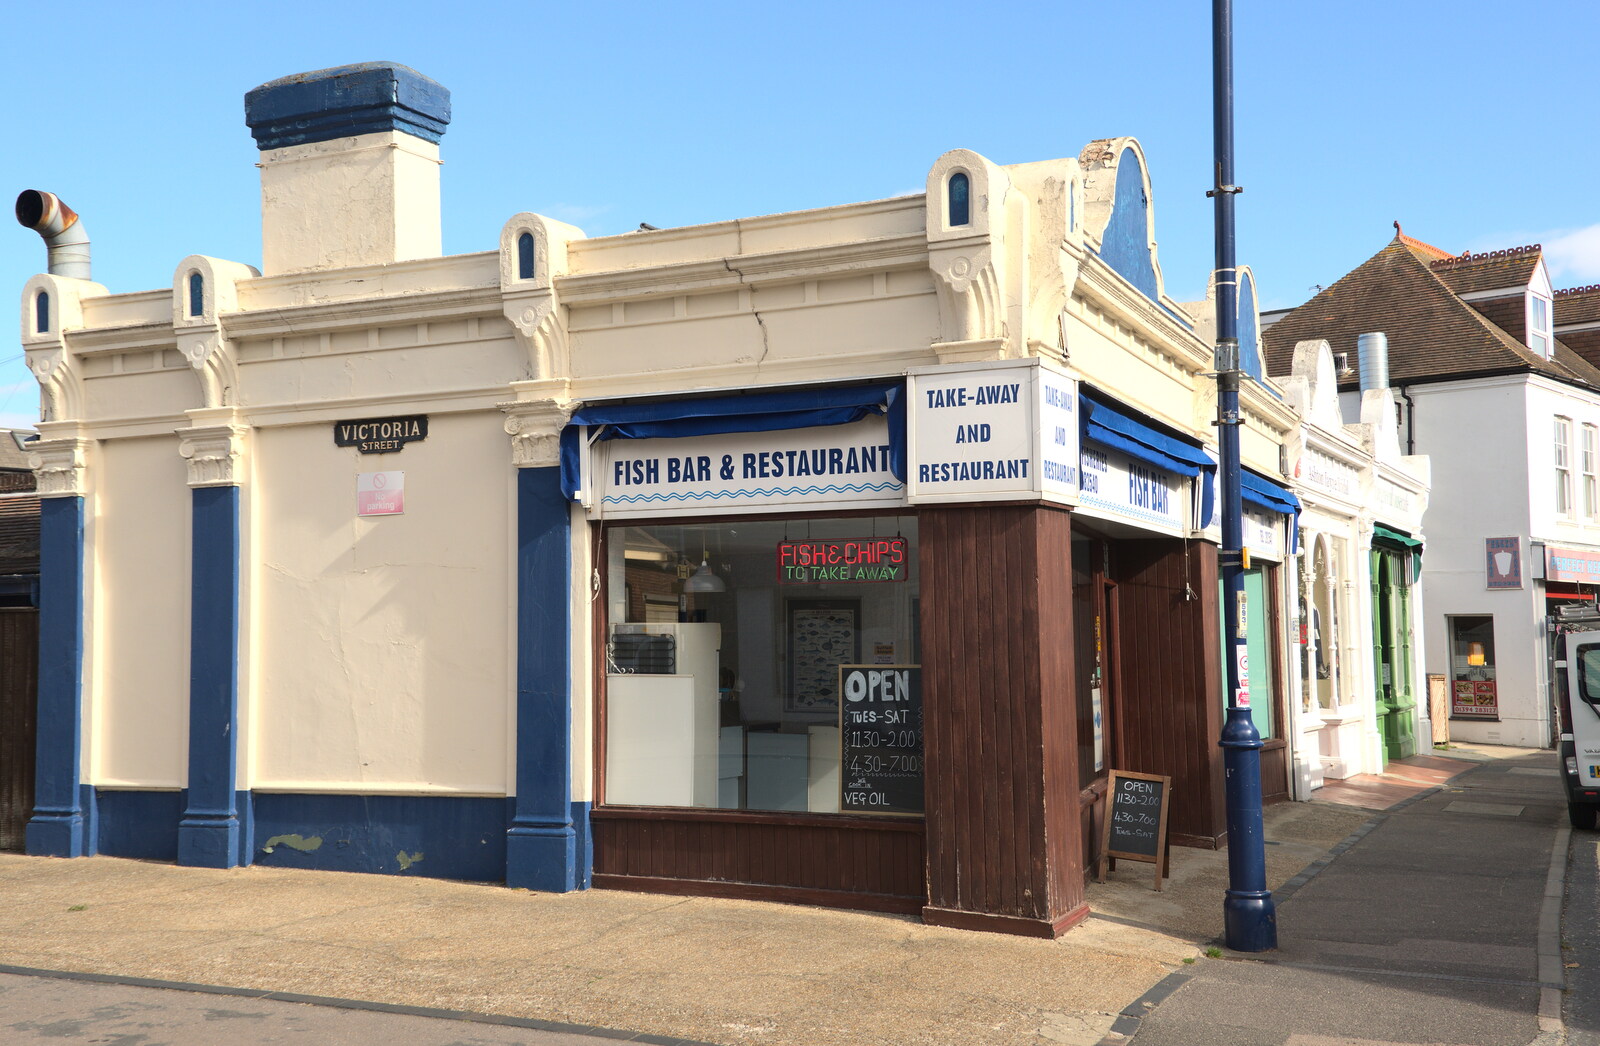 A Postcard from Felixstowe, Suffolk - 5th October 2022: A Victorian chip shop on Victoria Street